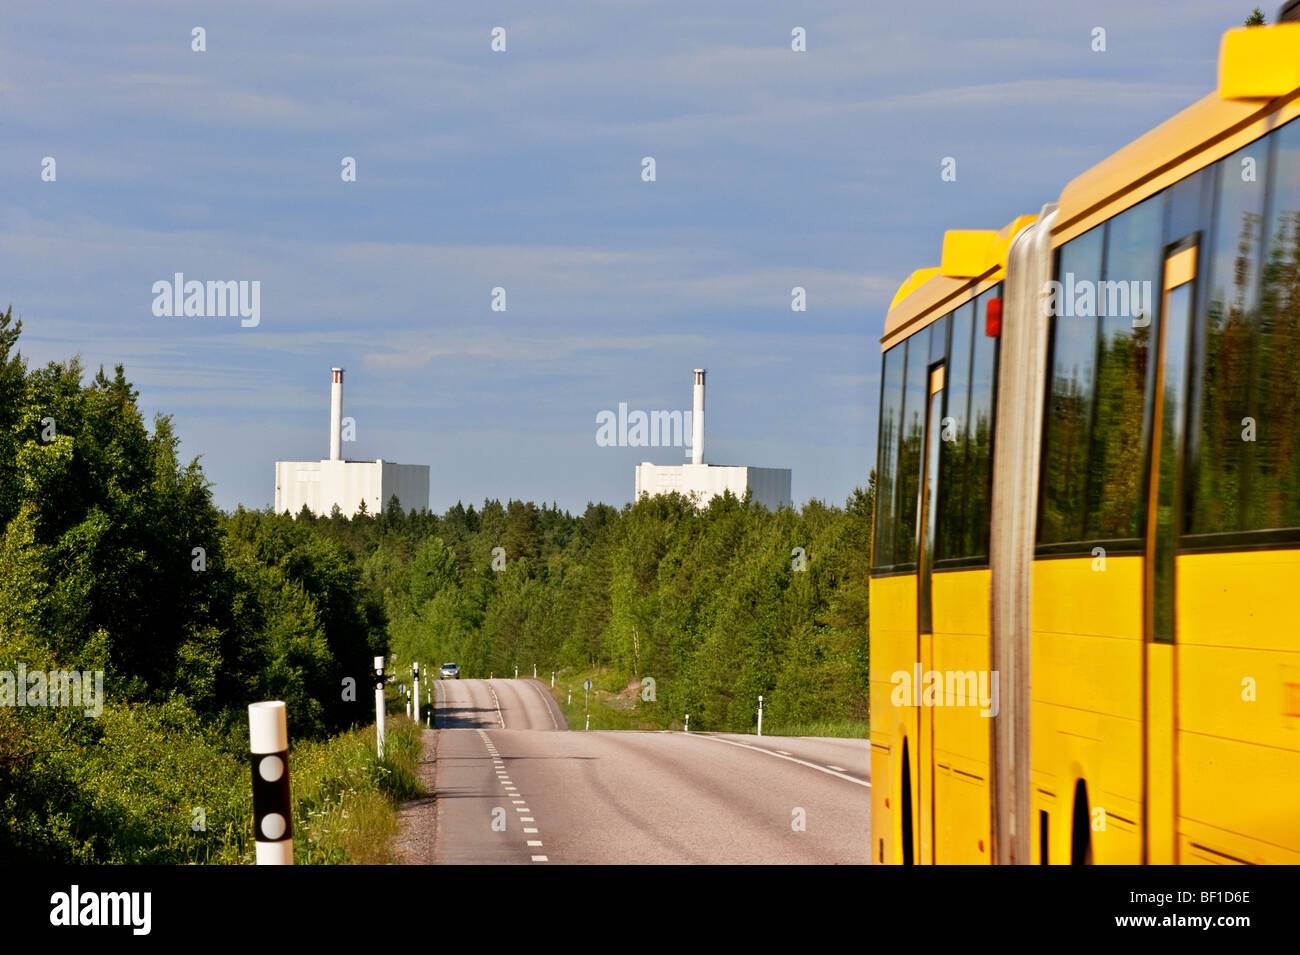 A bus on a country road close to Forsmark Nuclear Power Plant, Sweden. Stock Photo